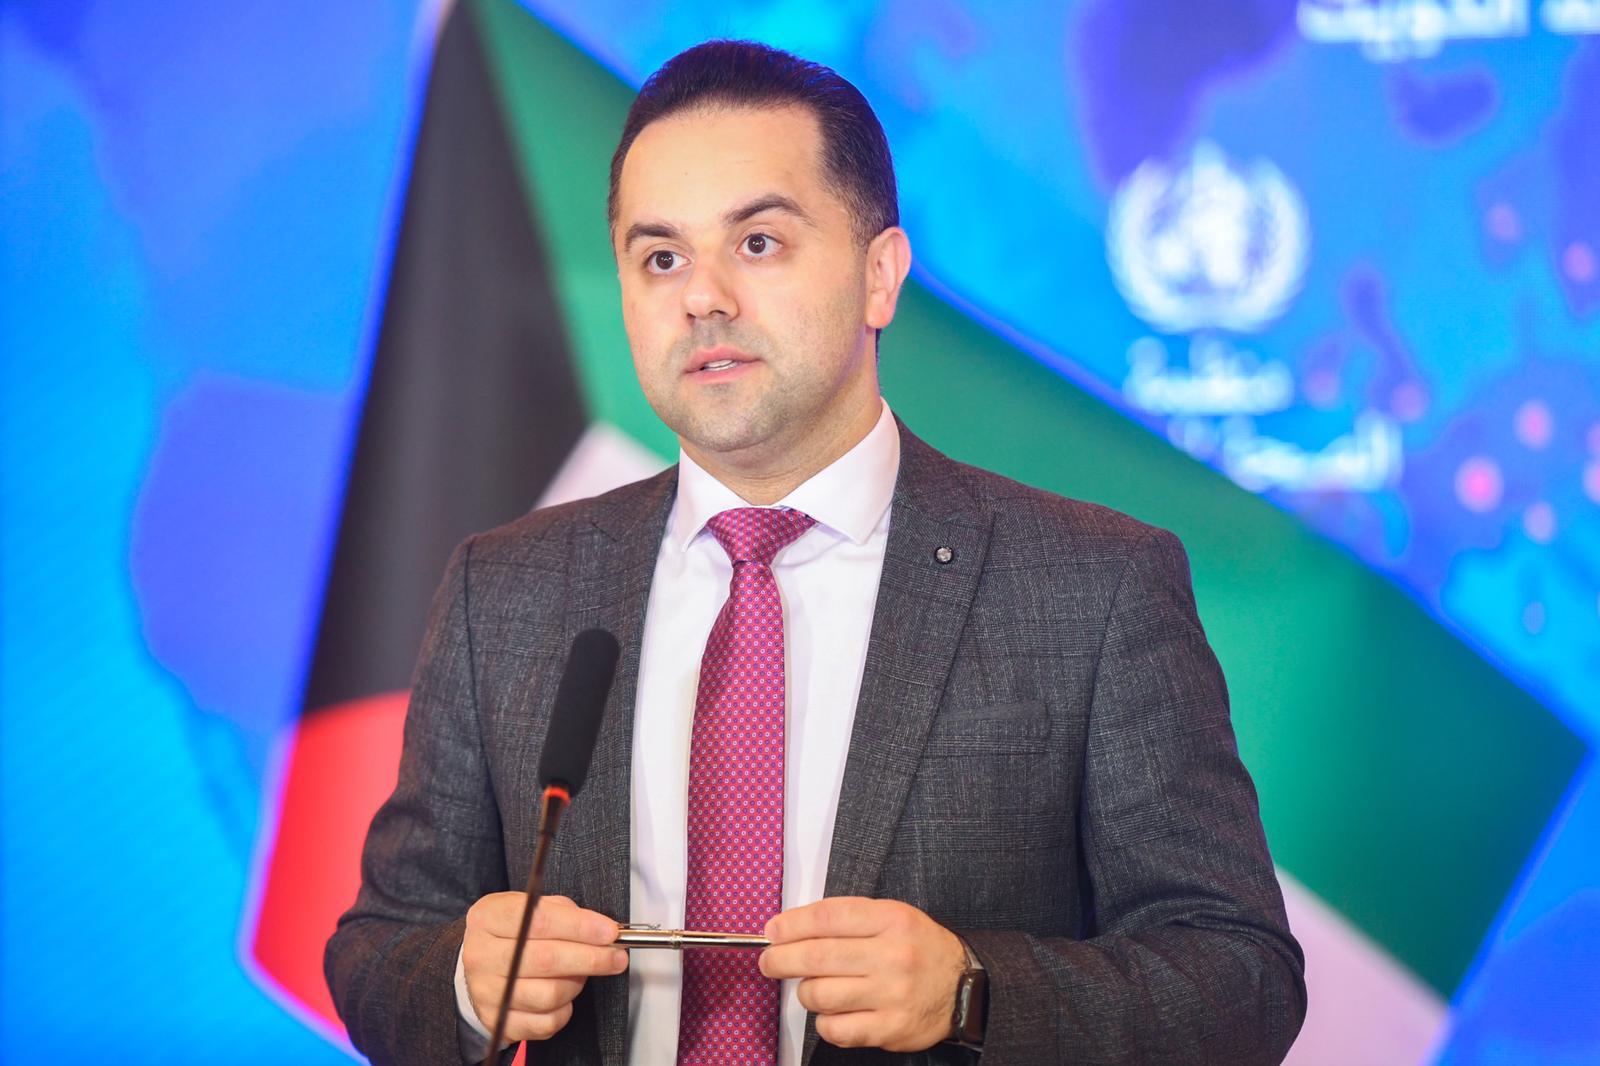 Official spokesperson of the Ministry of Health Dr. Abdullah Al-Sanad